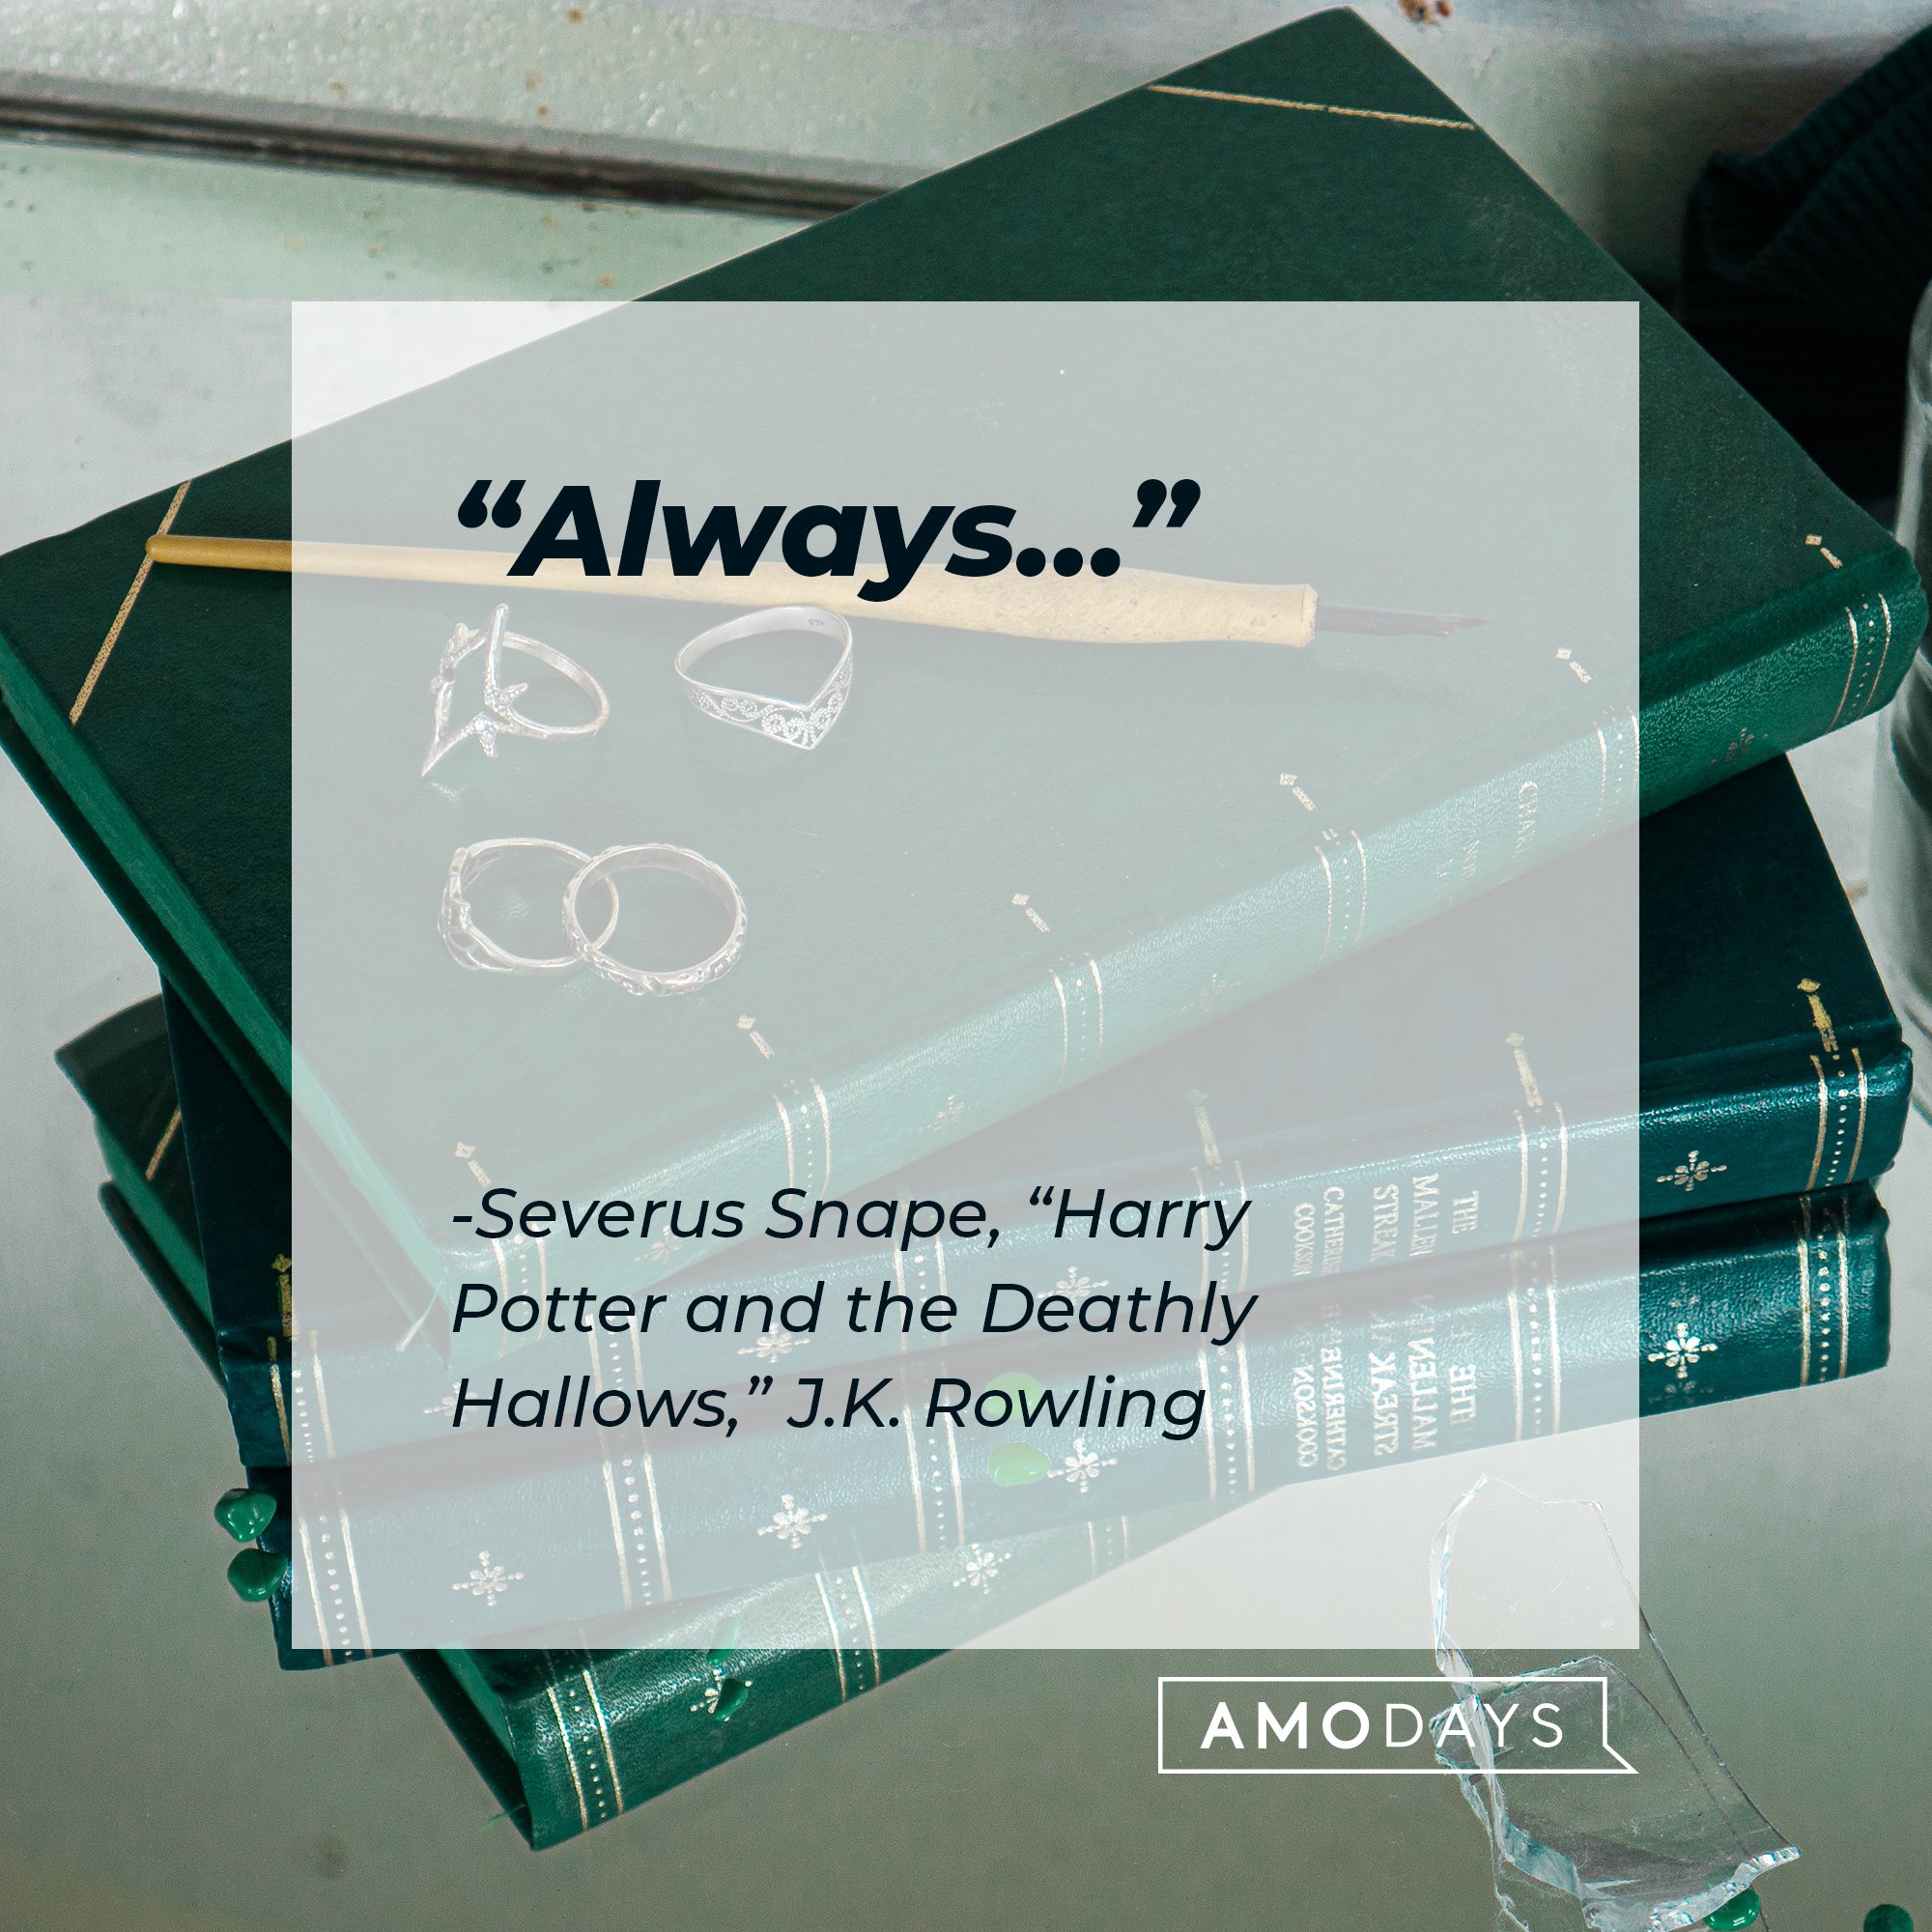 Severus Snape's quote from “Harry Potter and the Deathly Hallows": "Always..." | Image: AmoDays